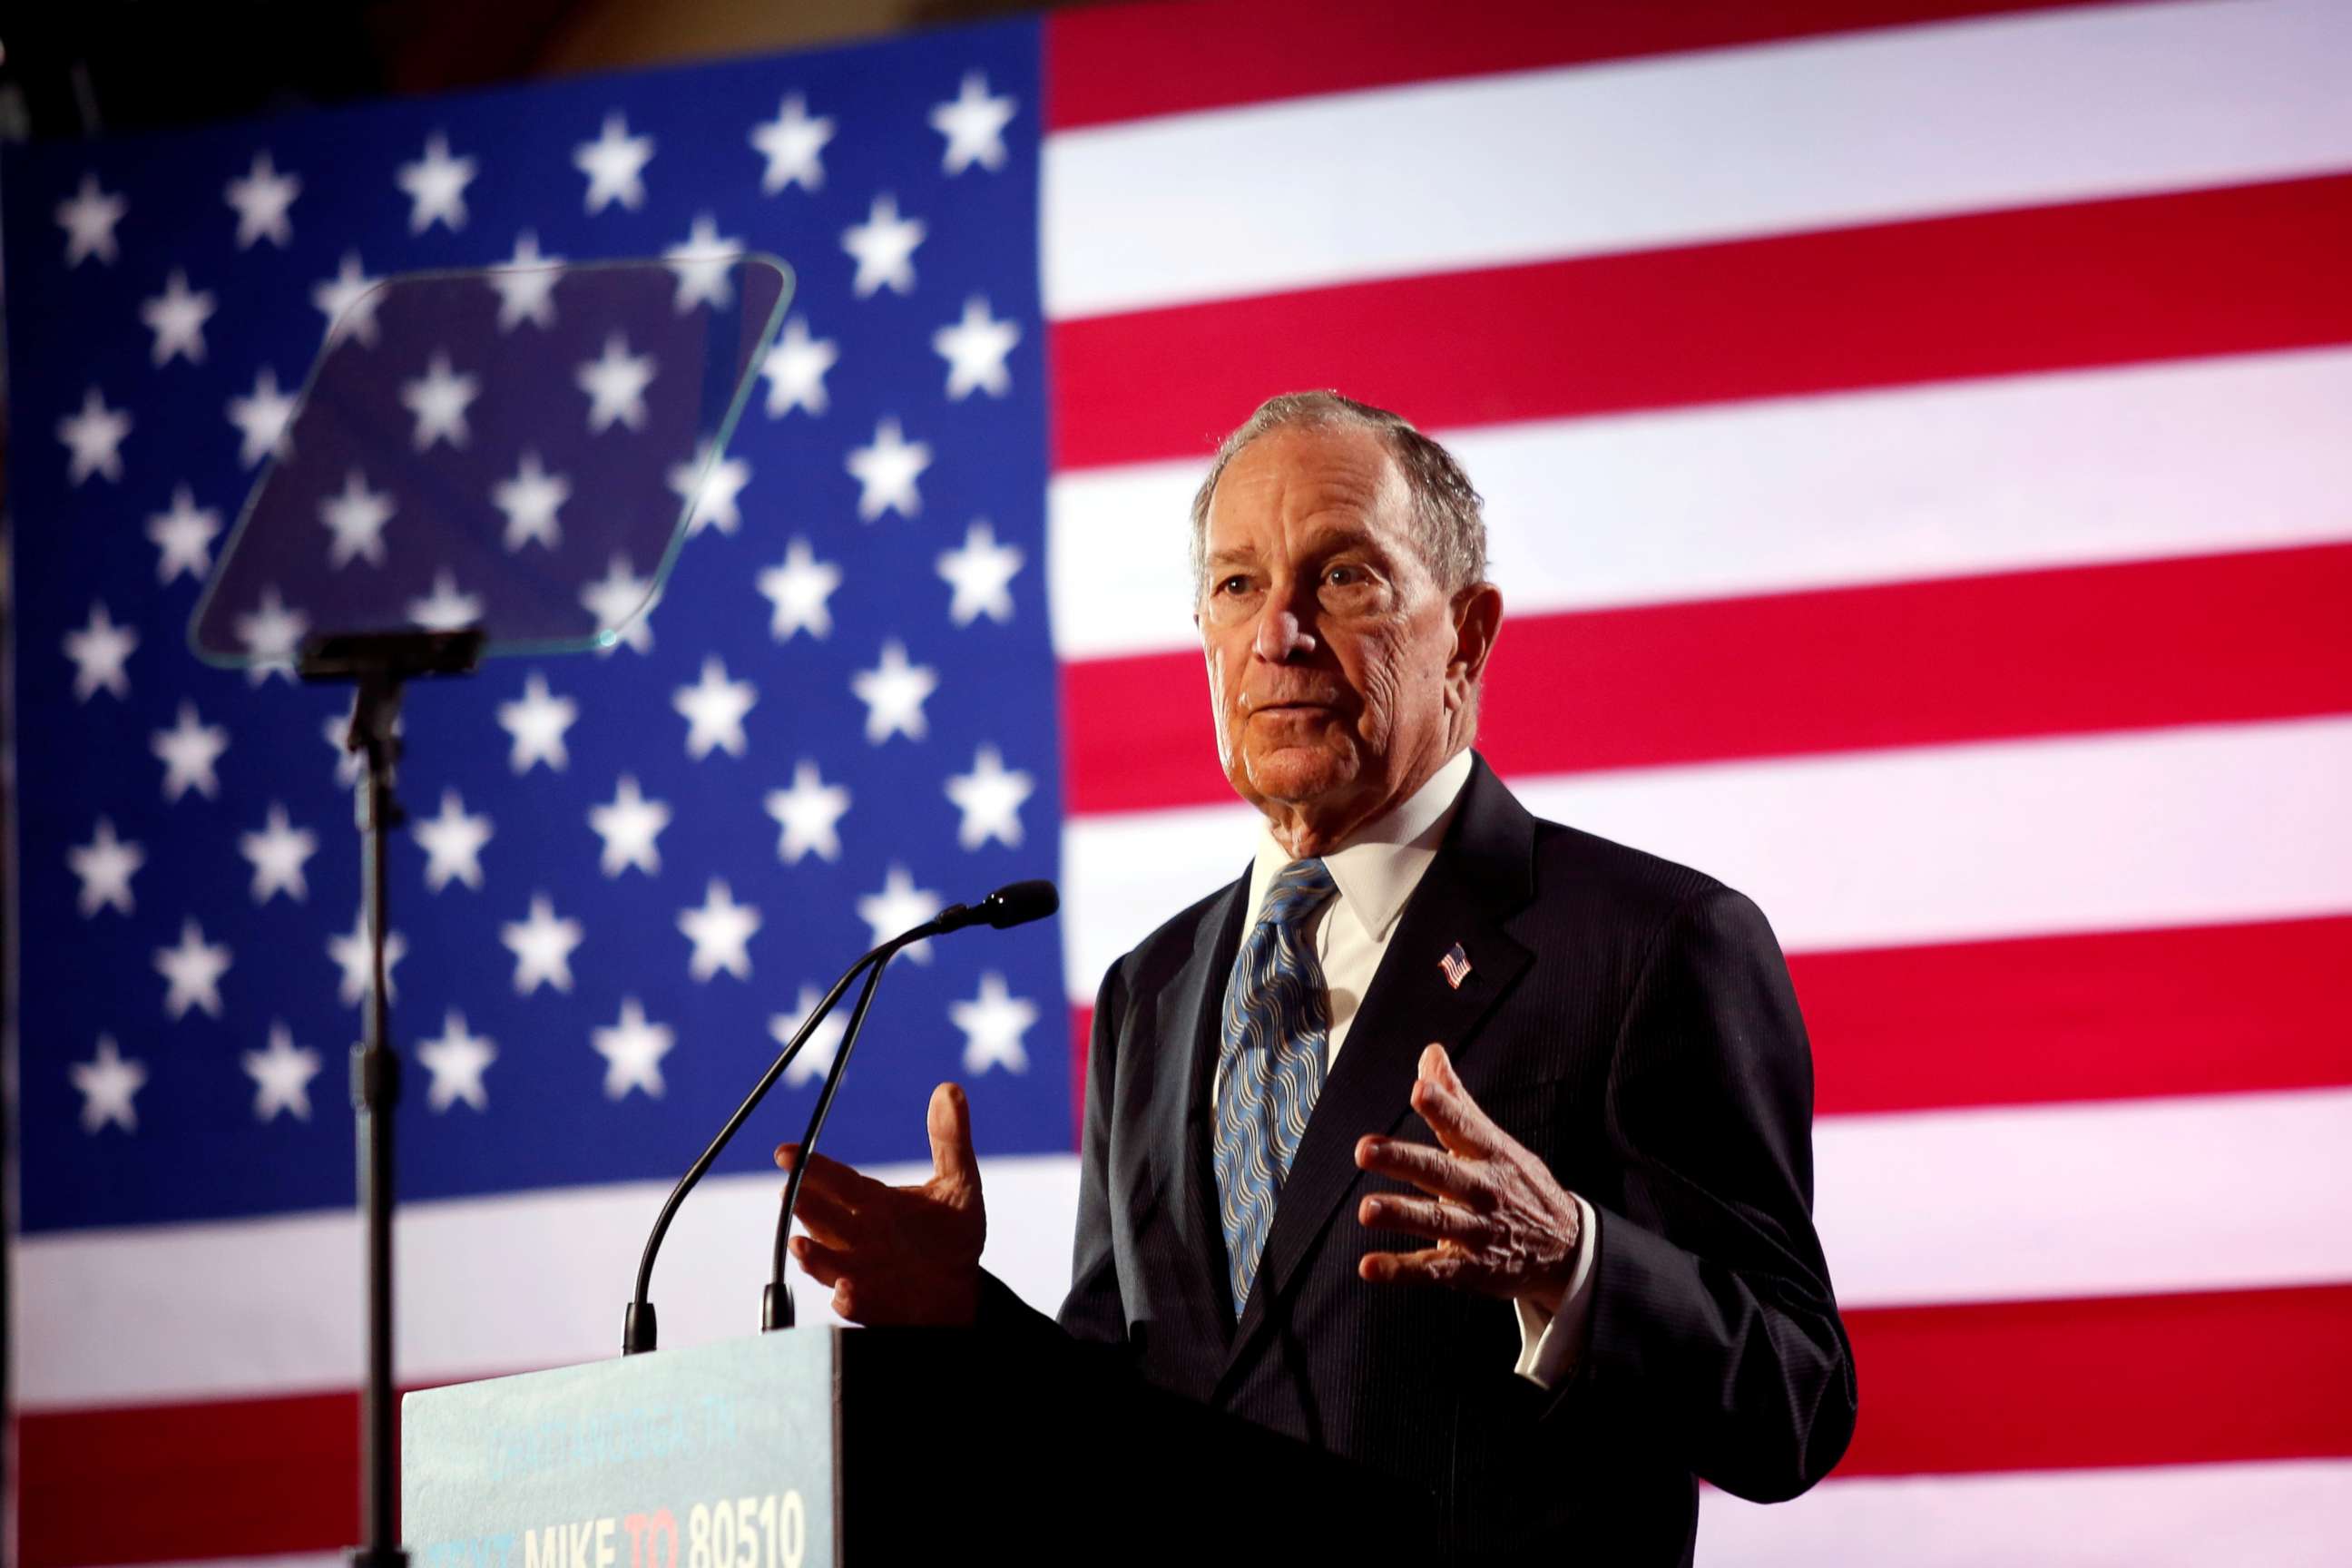 PHOTO: Democratic presidential candidate Michael Bloomberg speaks during a campaign event at the Bessie Smith Cultural Center in Chattanooga, Tennessee, U.S. February 12, 2020.